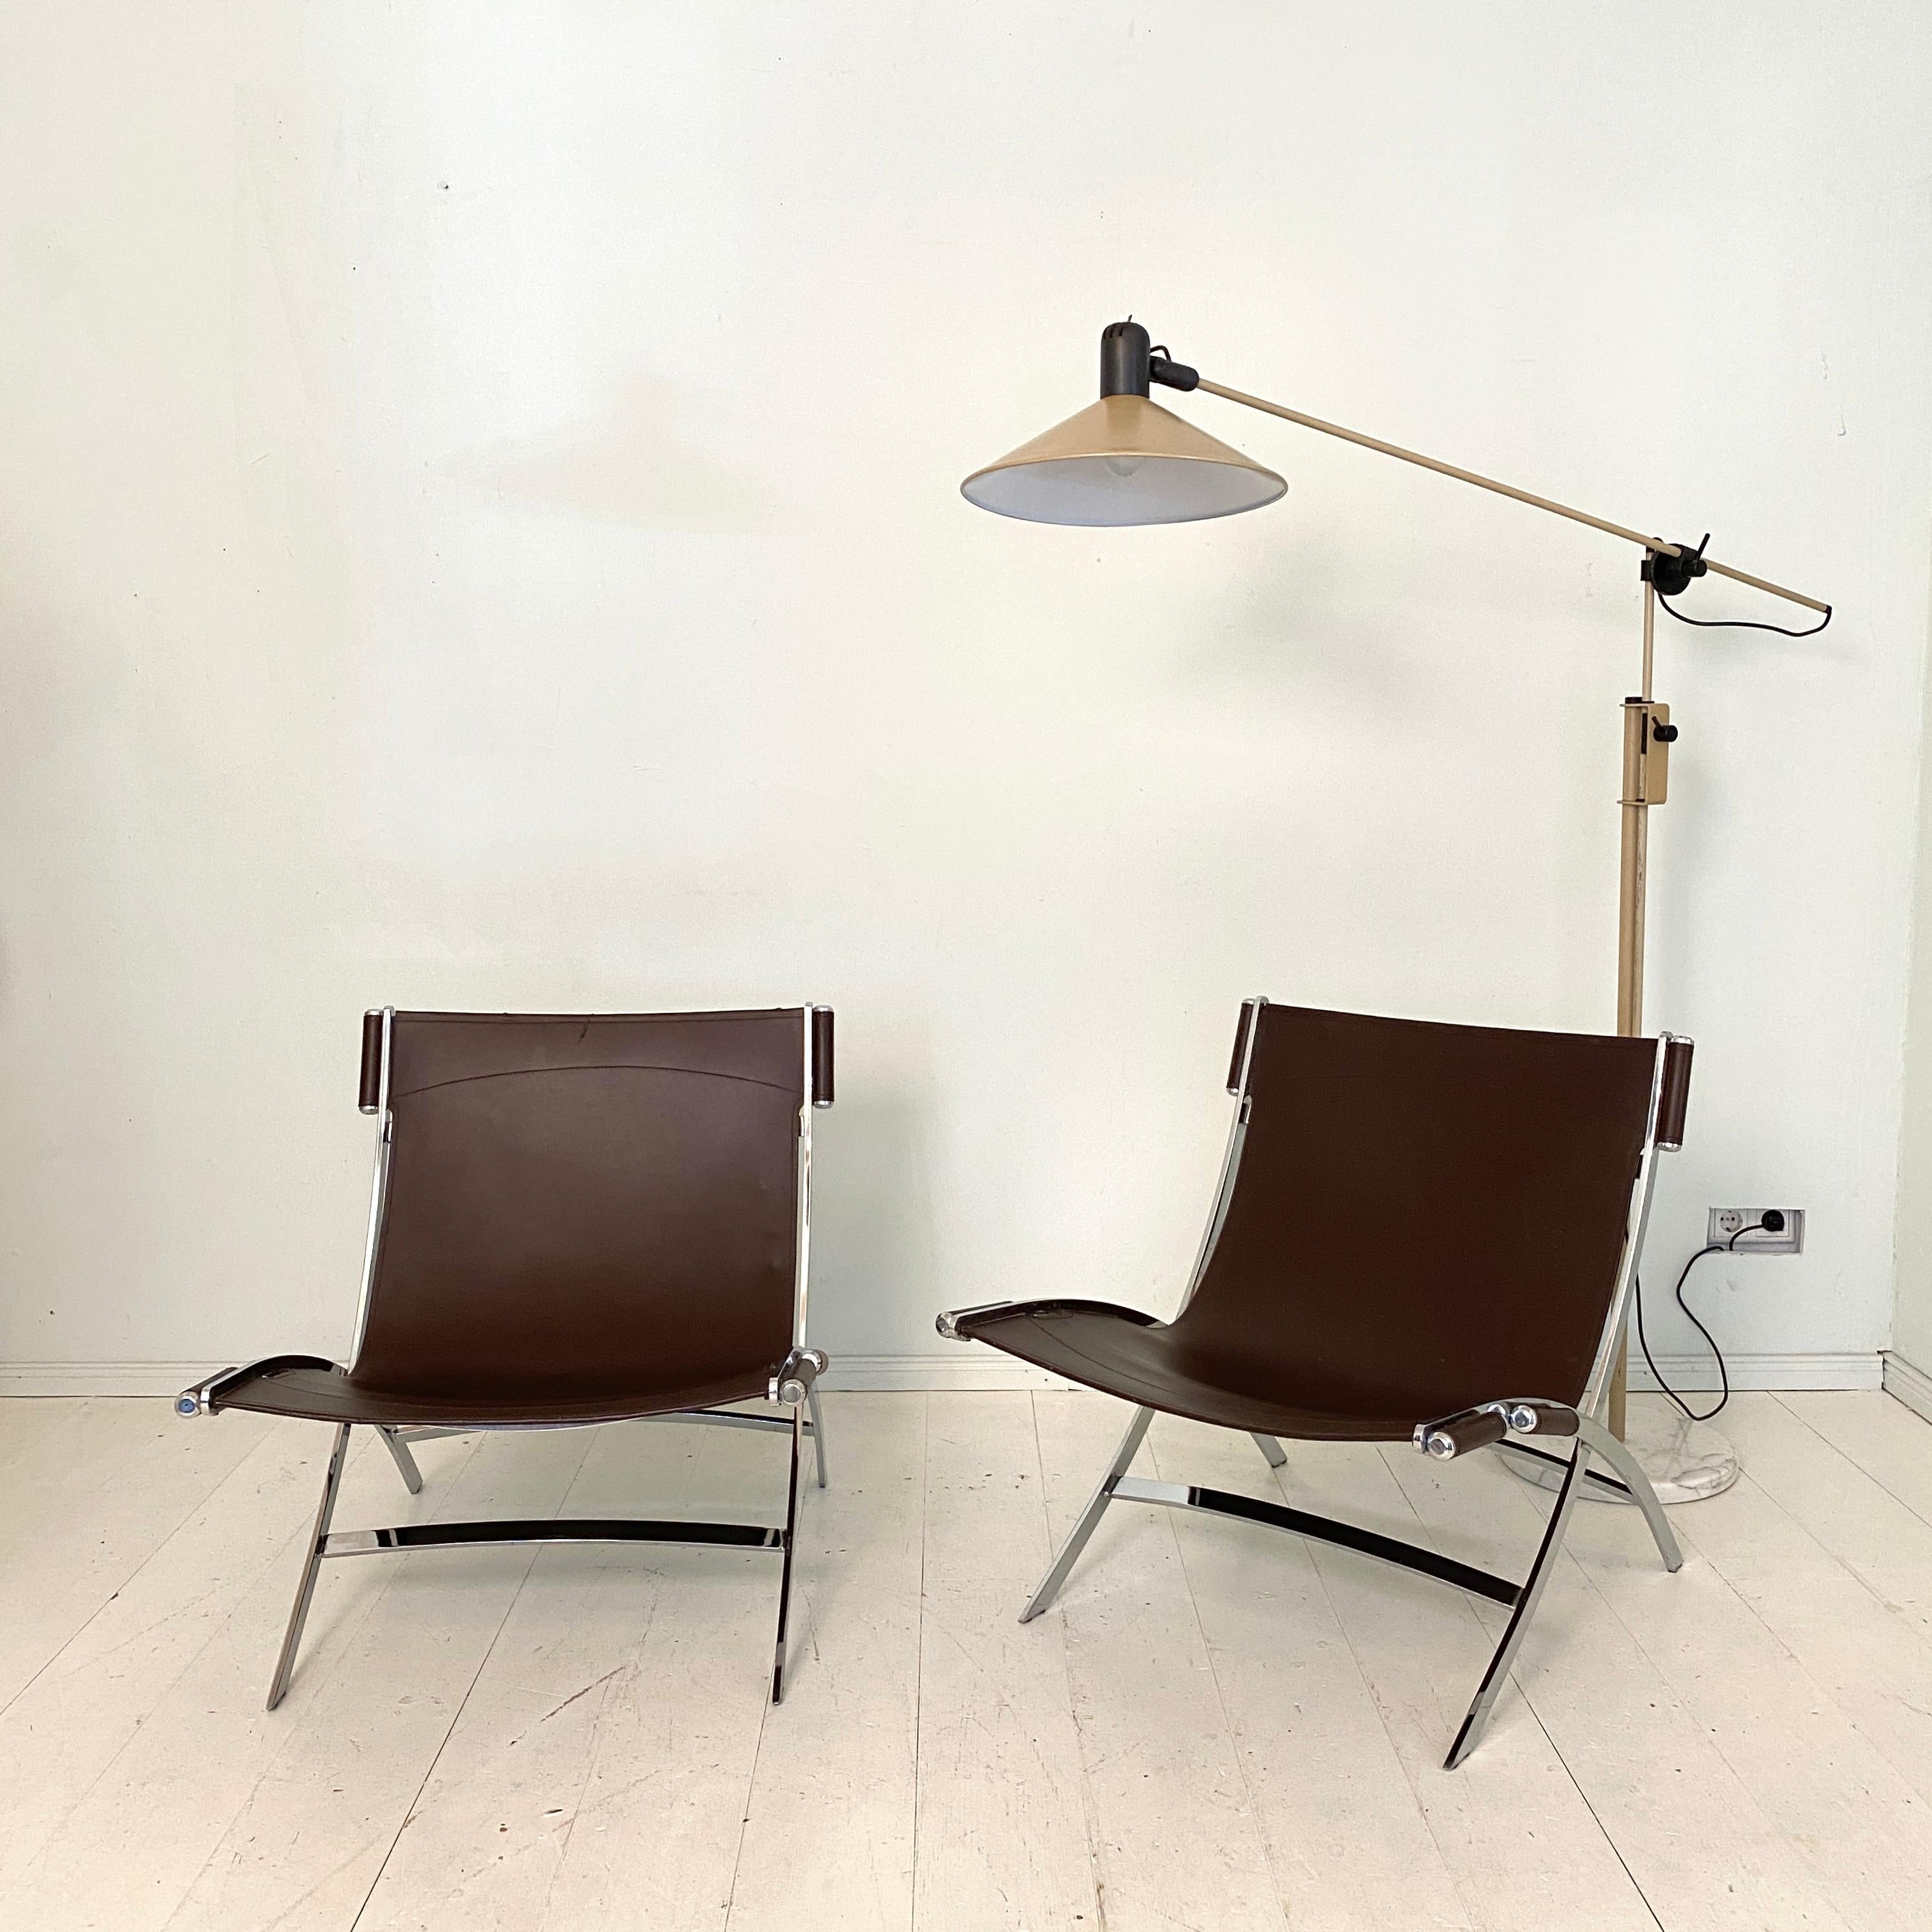 Late 20th Century Pair of Lounge Chairs by Antonio Citterio in Chrome and Leather for Flexform